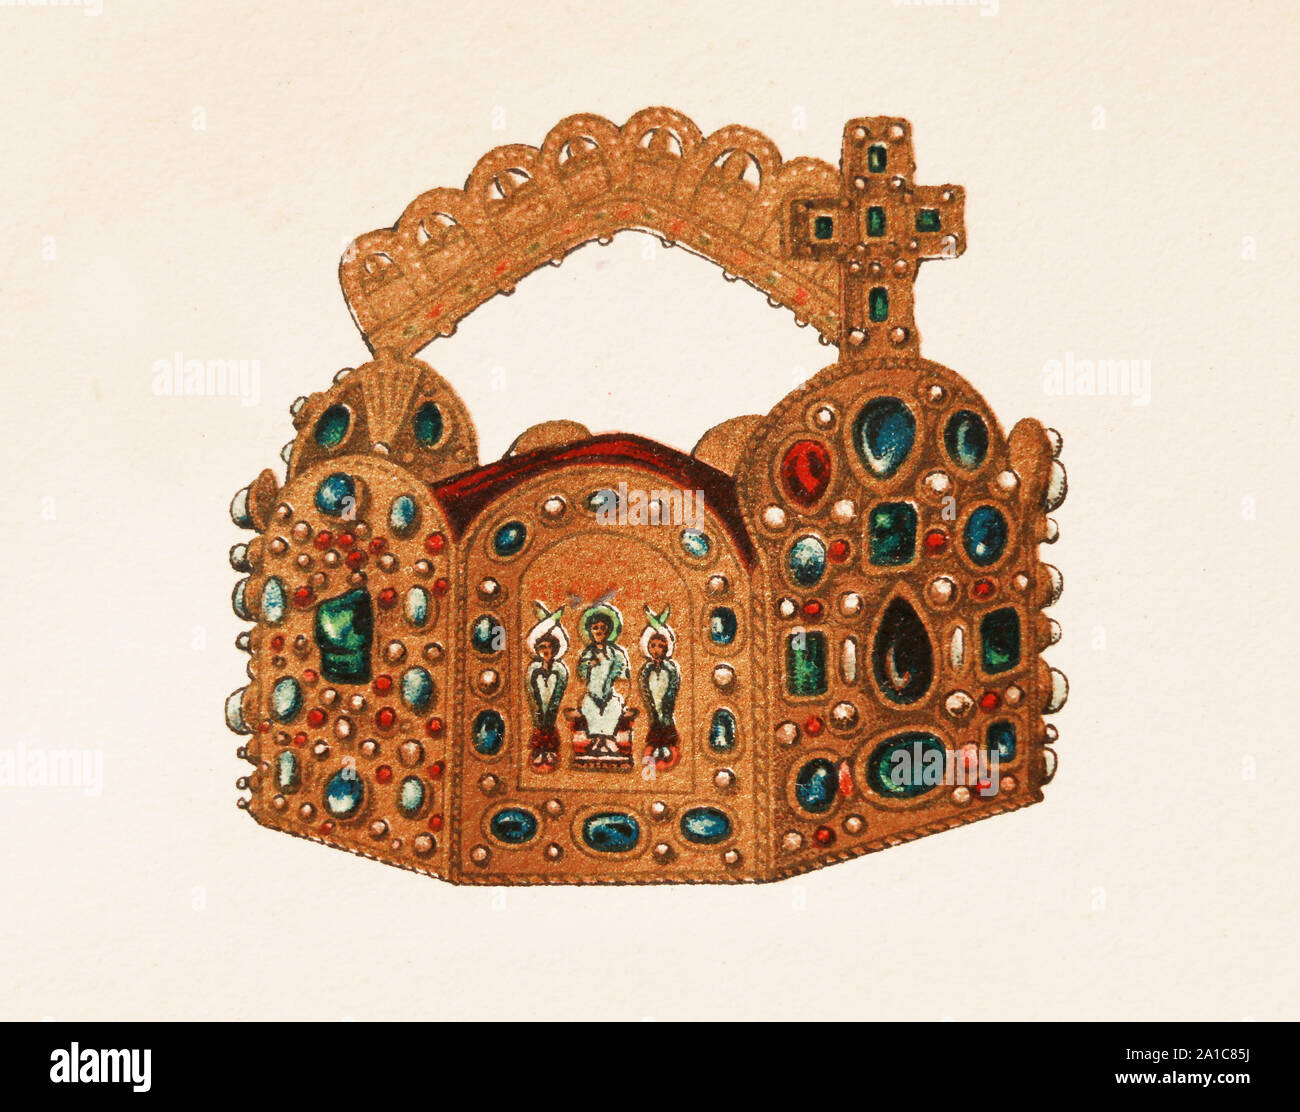 Imperial crown - relic of the Holy Roman Empire. Stock Photo